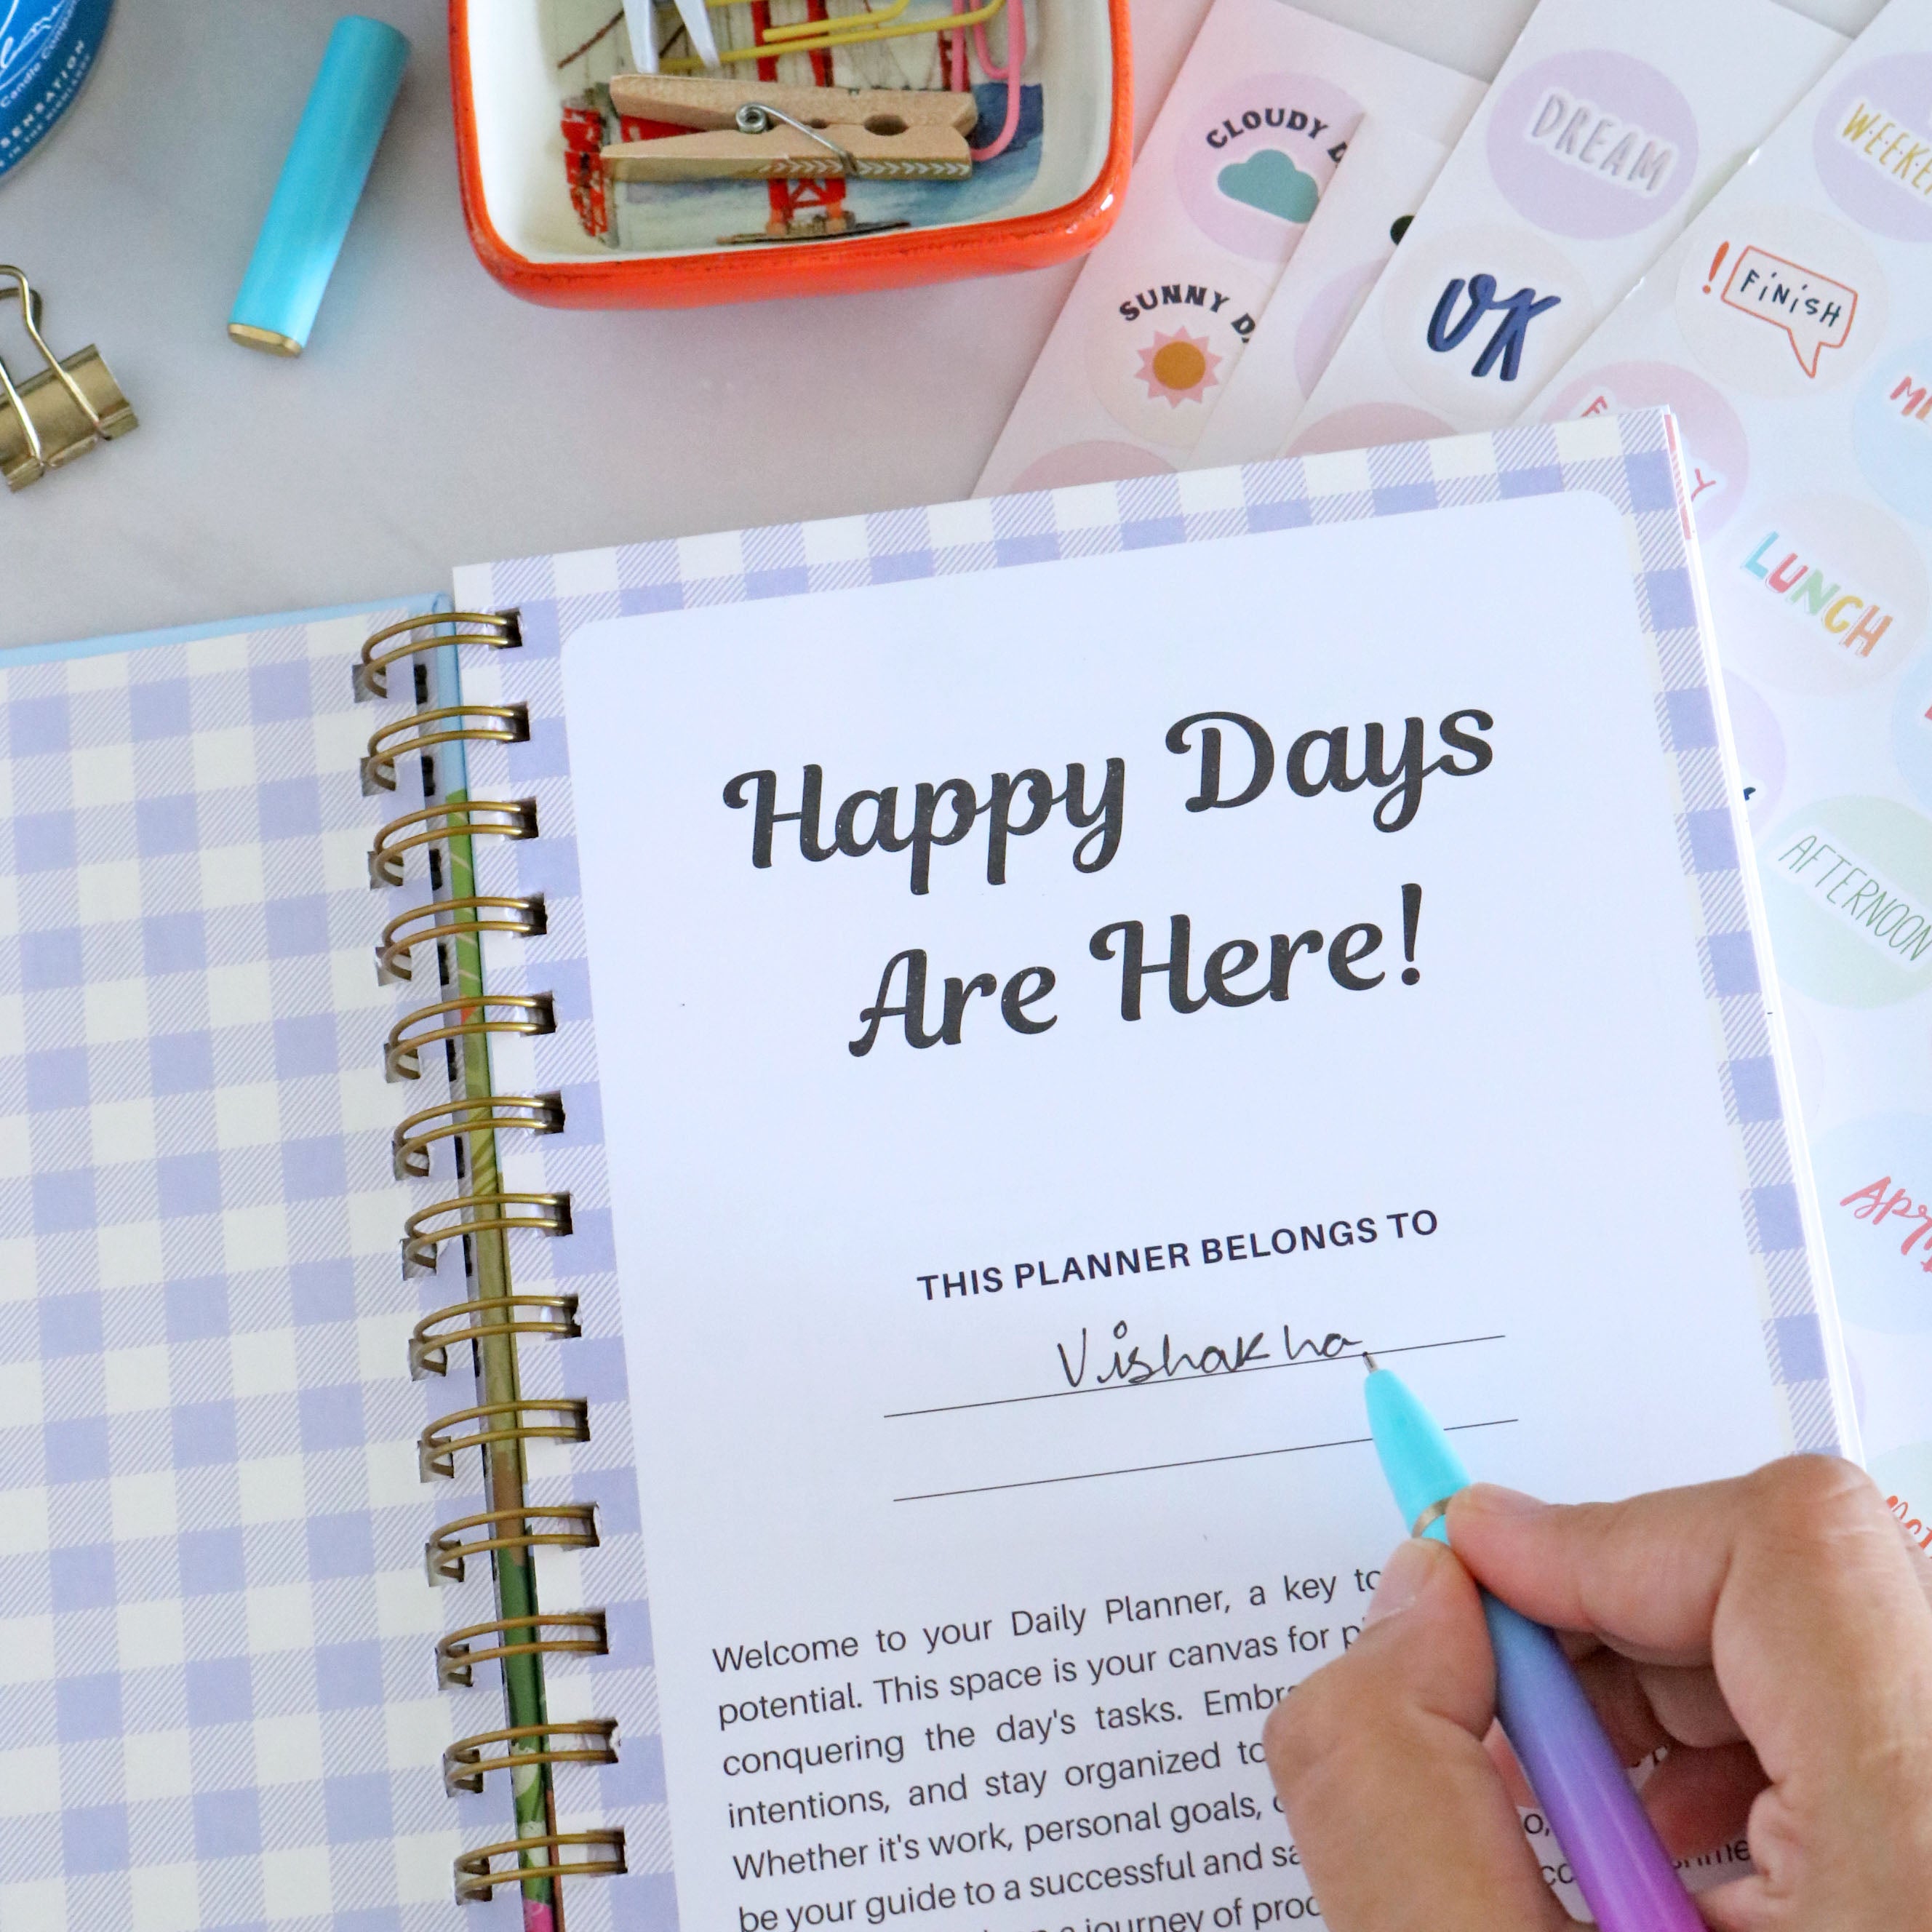 It's A Beautiful Day - Undated Daily Planner